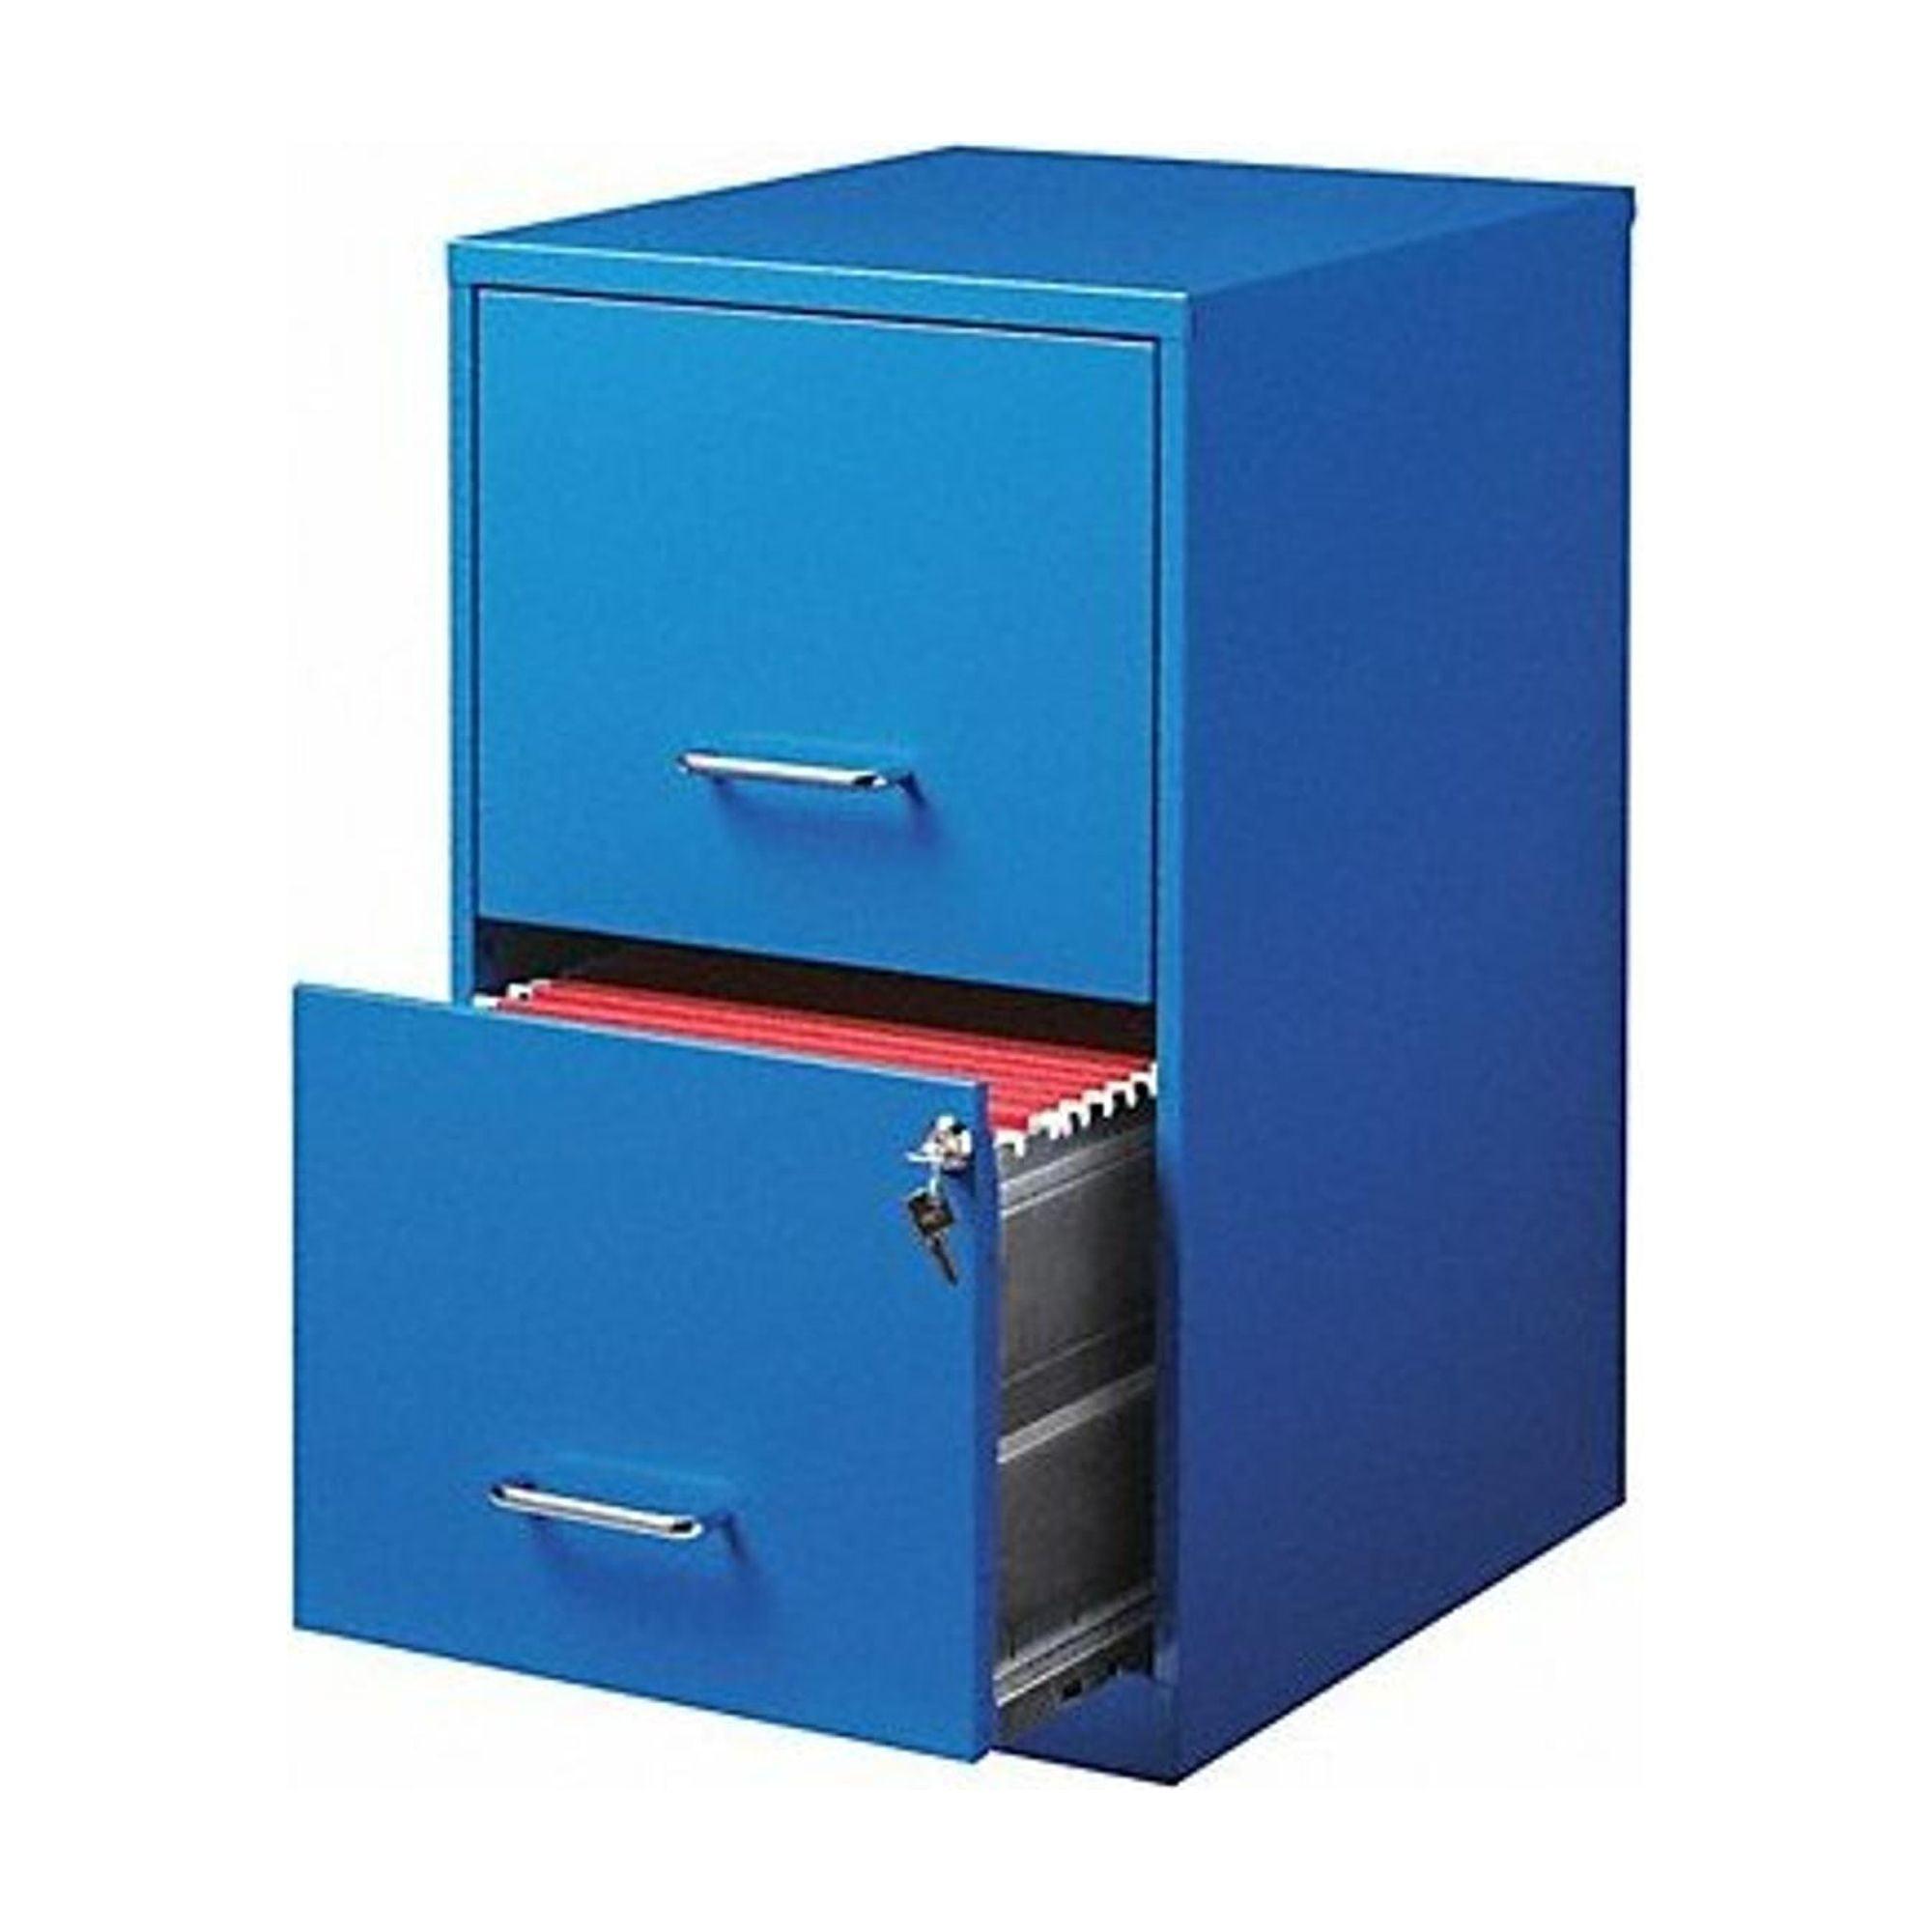 Compact 24.5" Blue Steel 2-Drawer Lockable File Cabinet